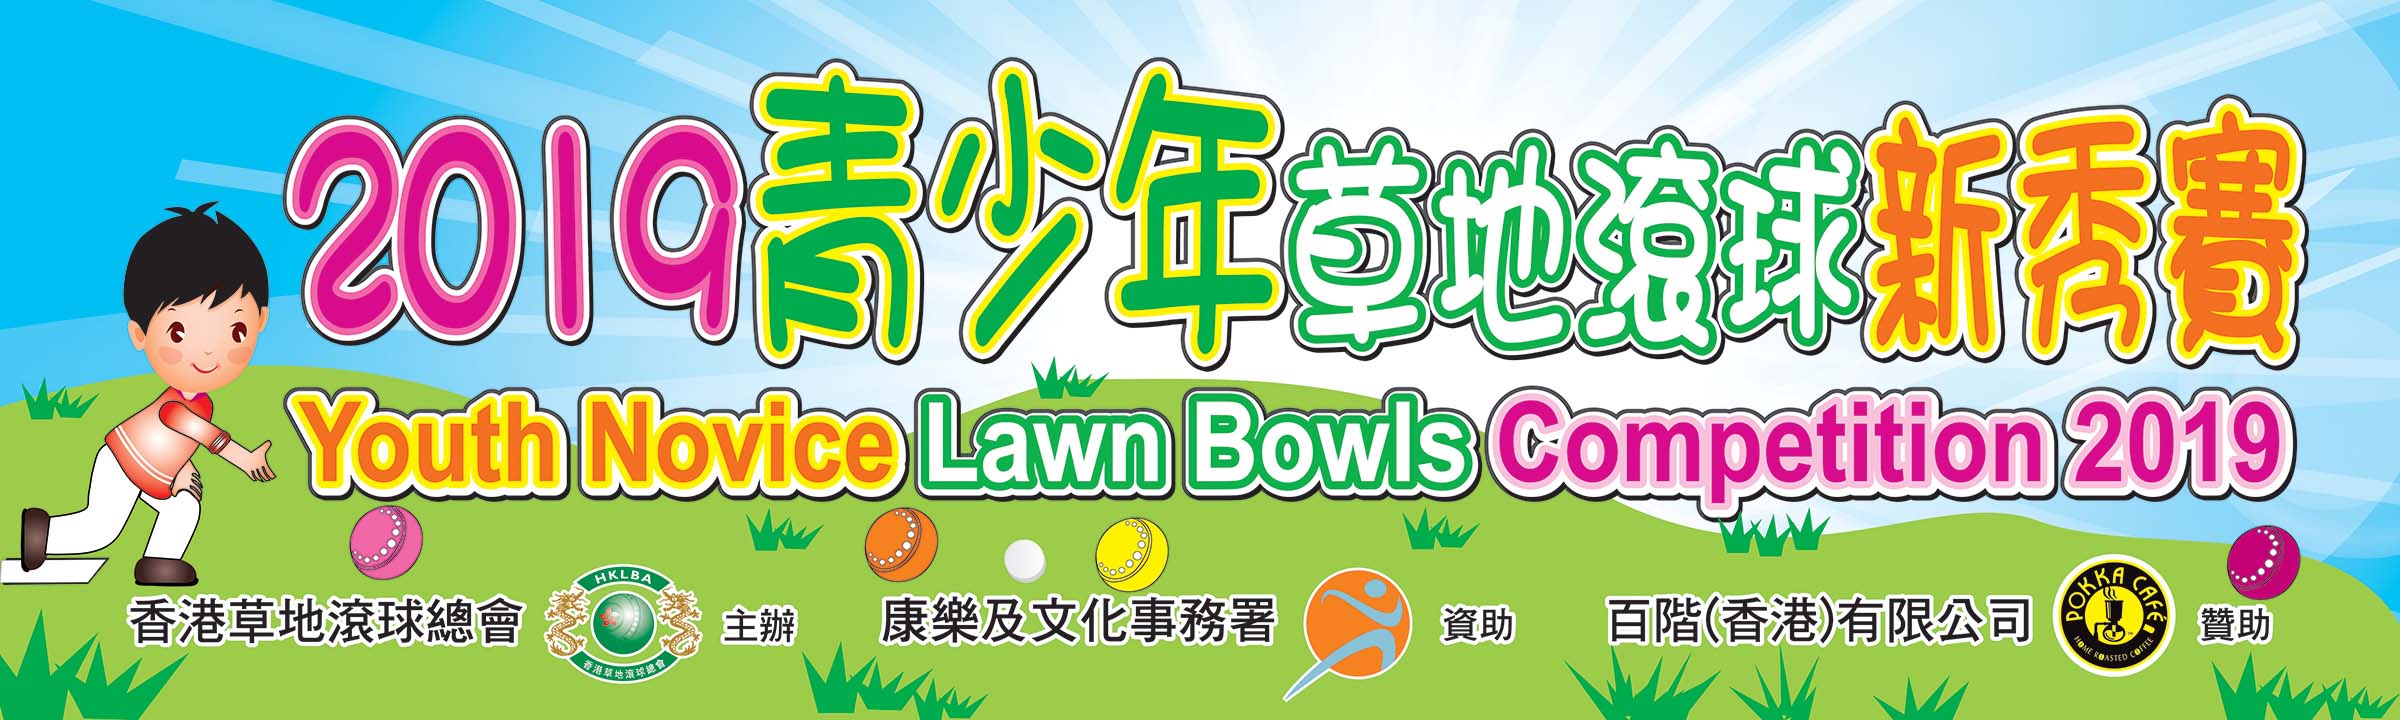 Youth Novice Lawn Bowls Competition 2019 (Updated on 22/3/19)